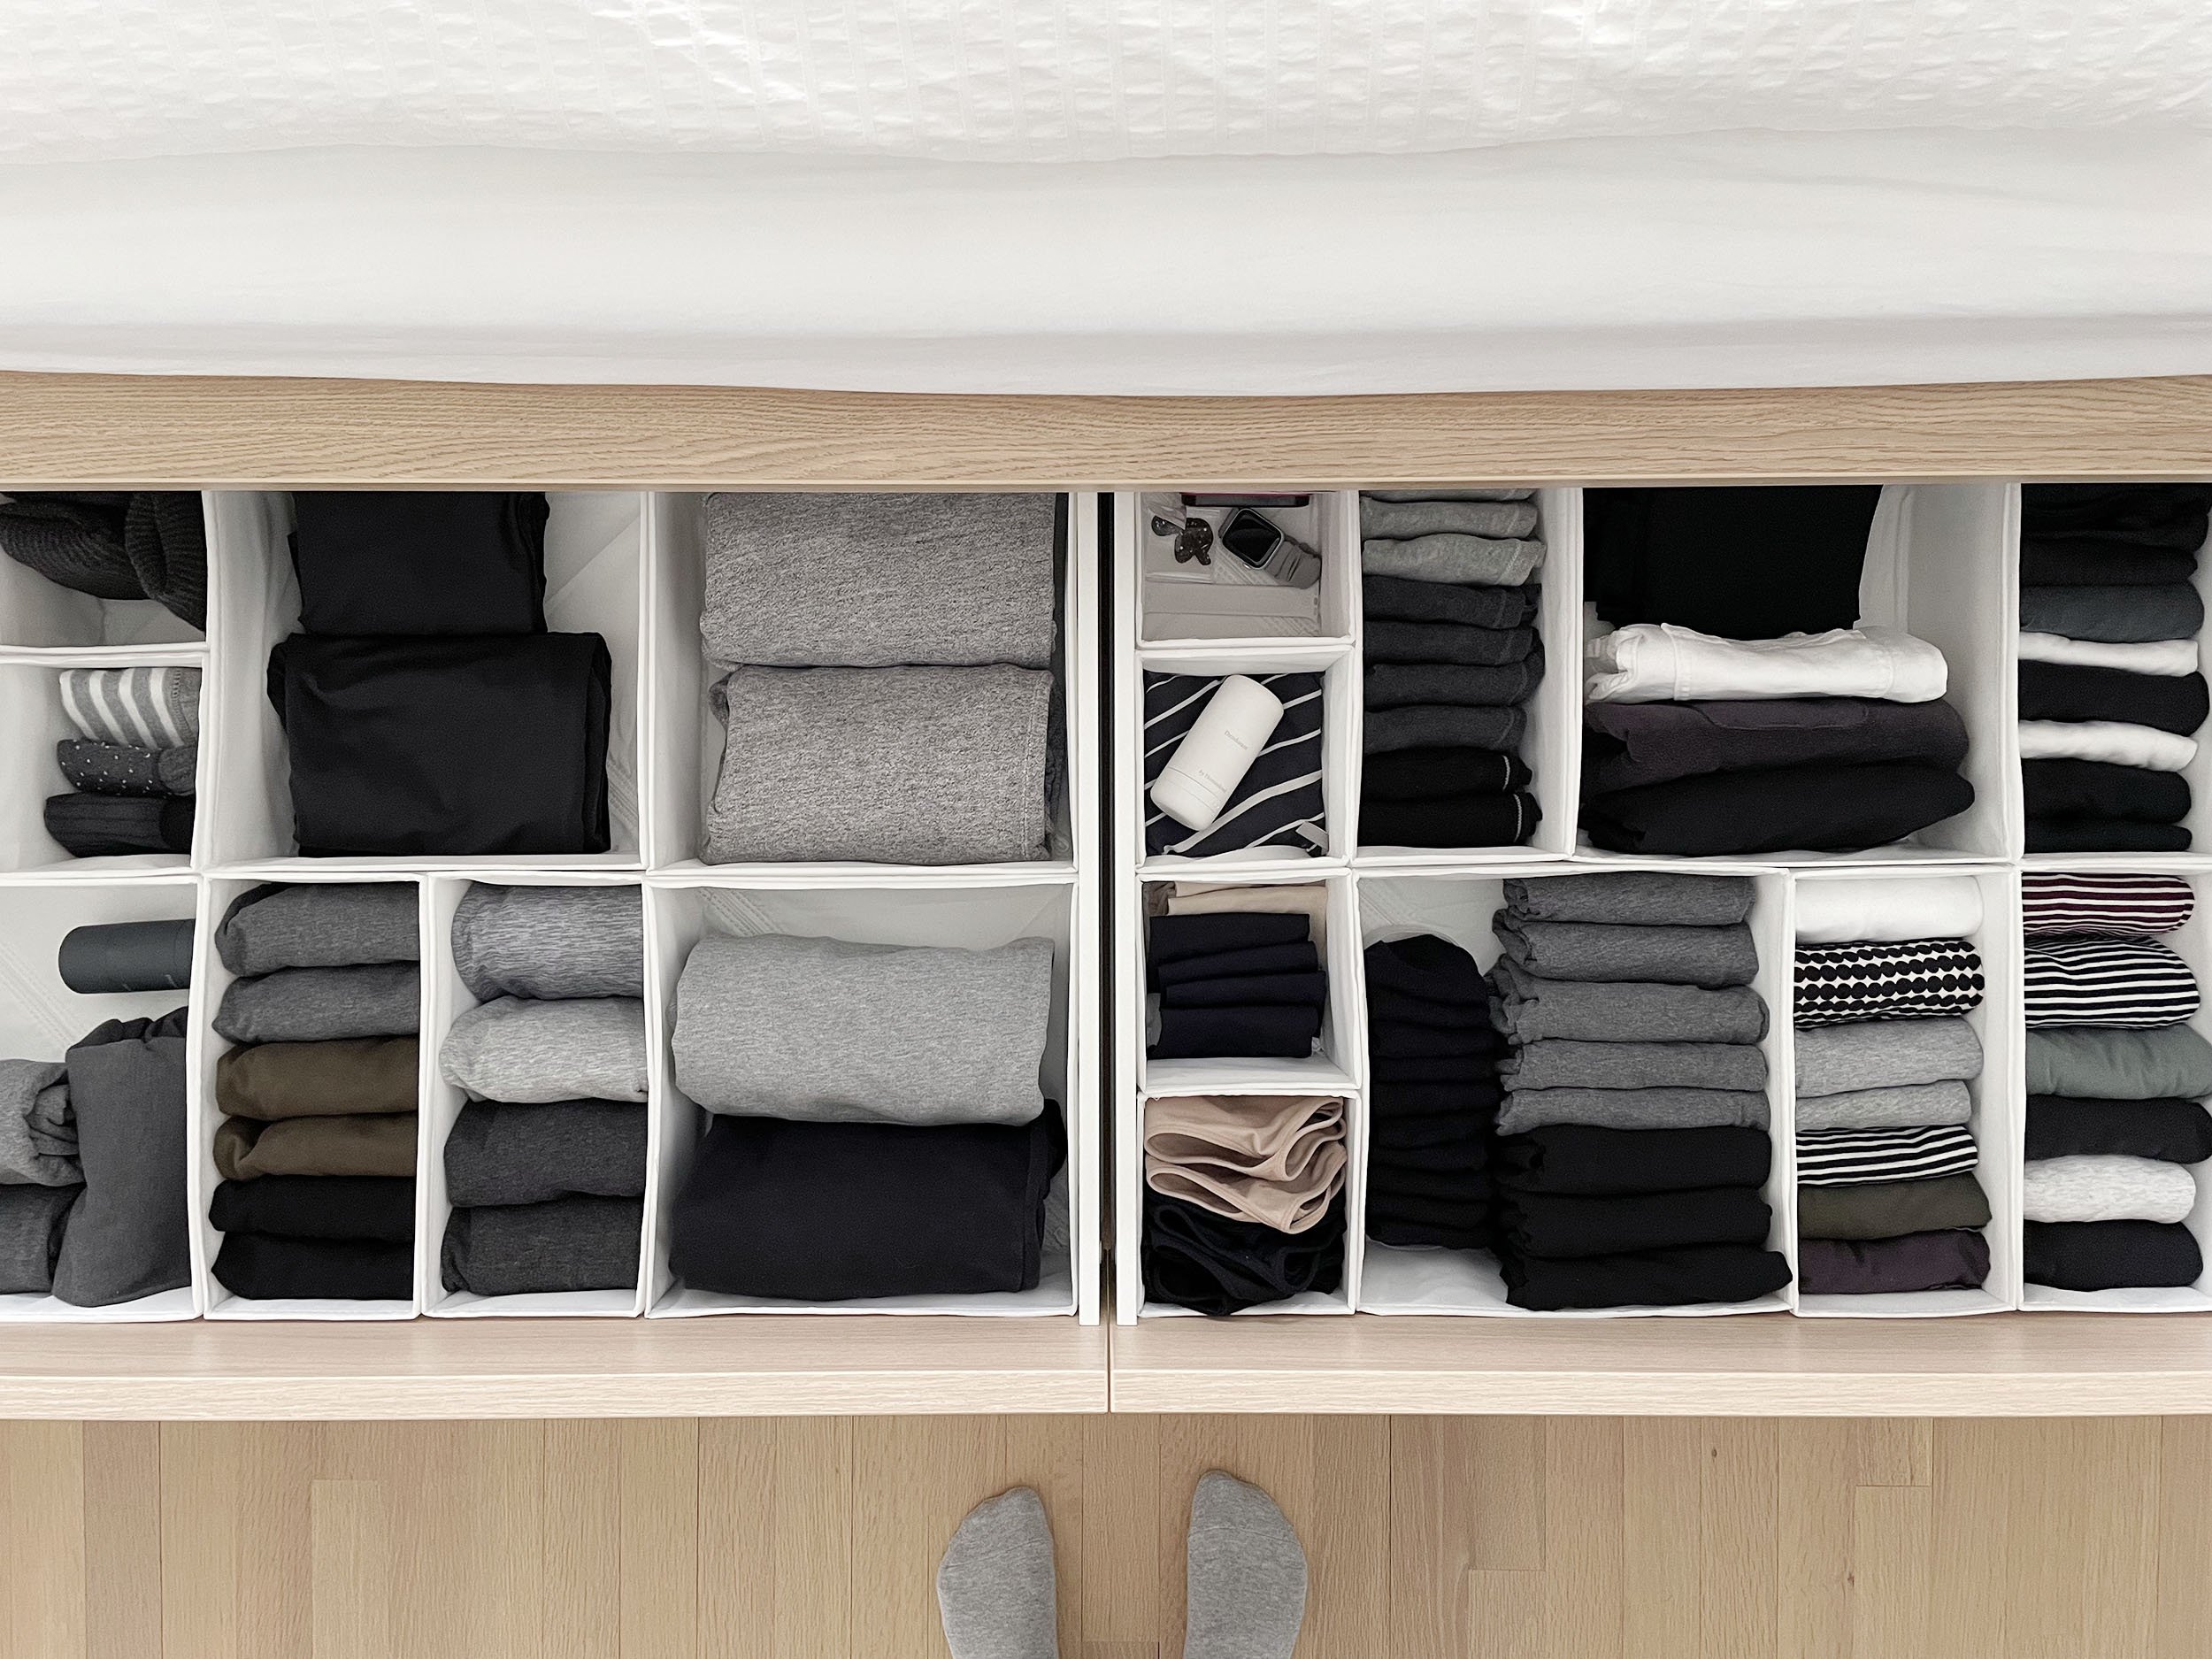 Why Homeowners Are Sacrificing Bedroom Space For A Bigger Closet